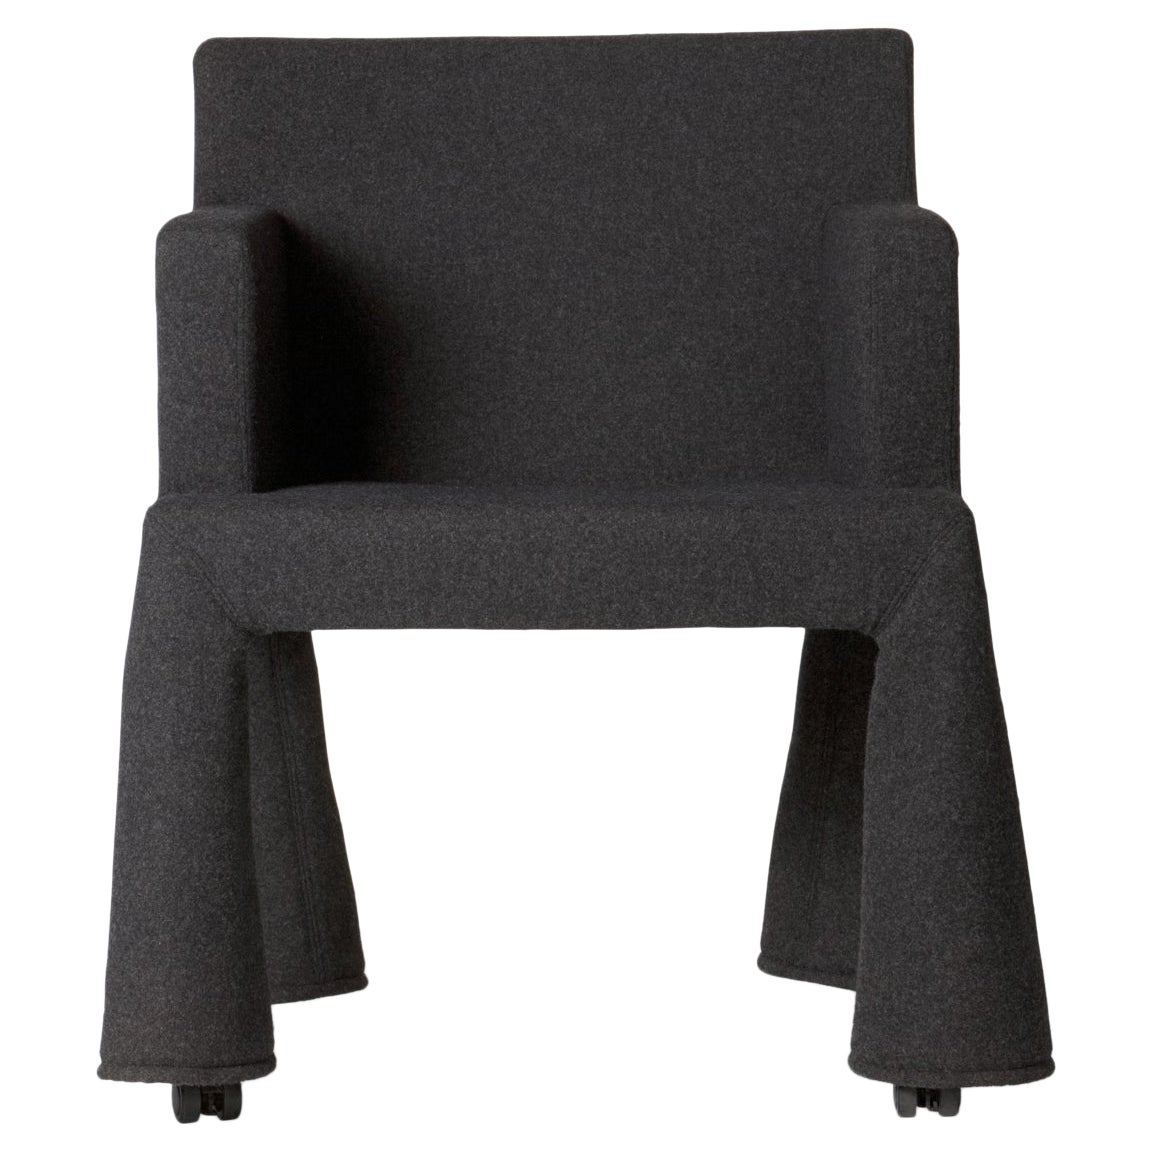 Moooi VIP Chair in Divina 3, 191 Black Upholstery with Steel Frame and Wheels